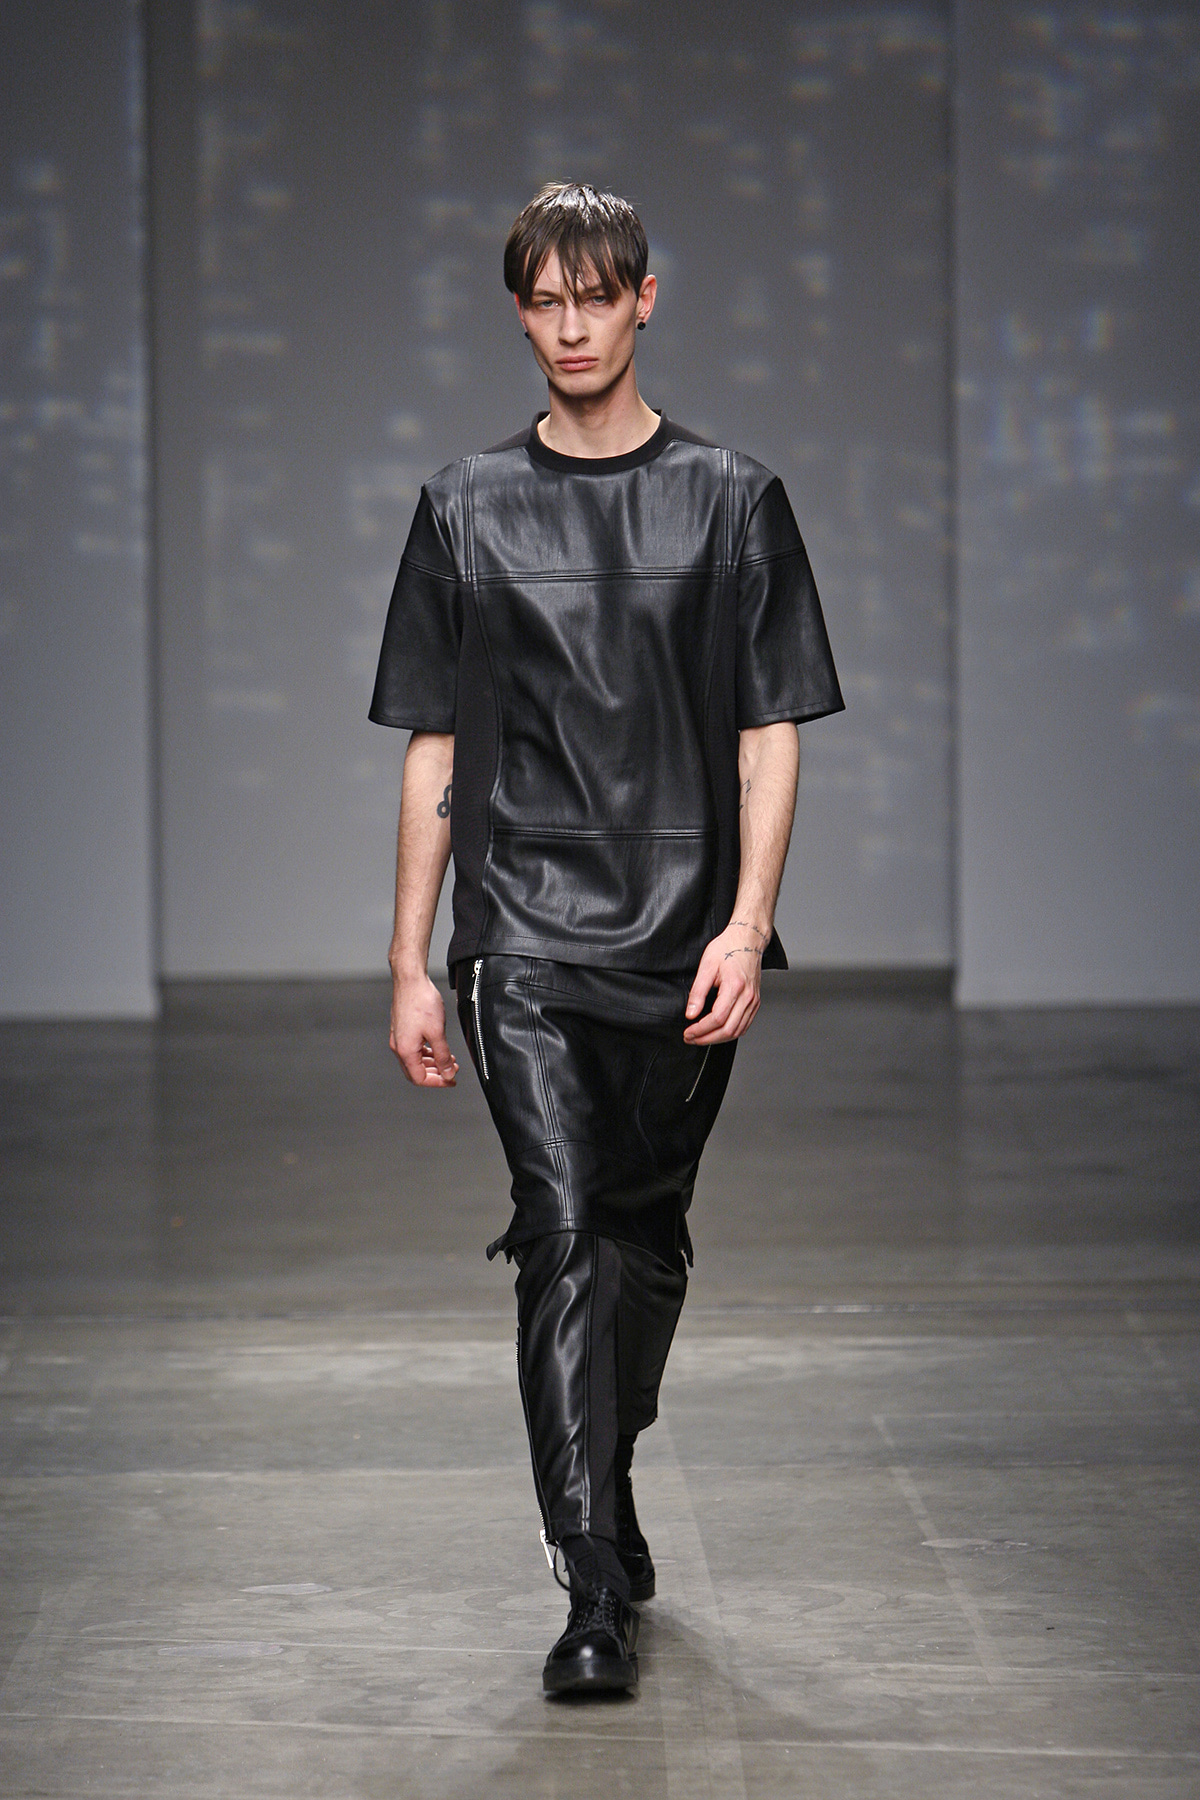 2014 FW NEW YORK COLLECTION